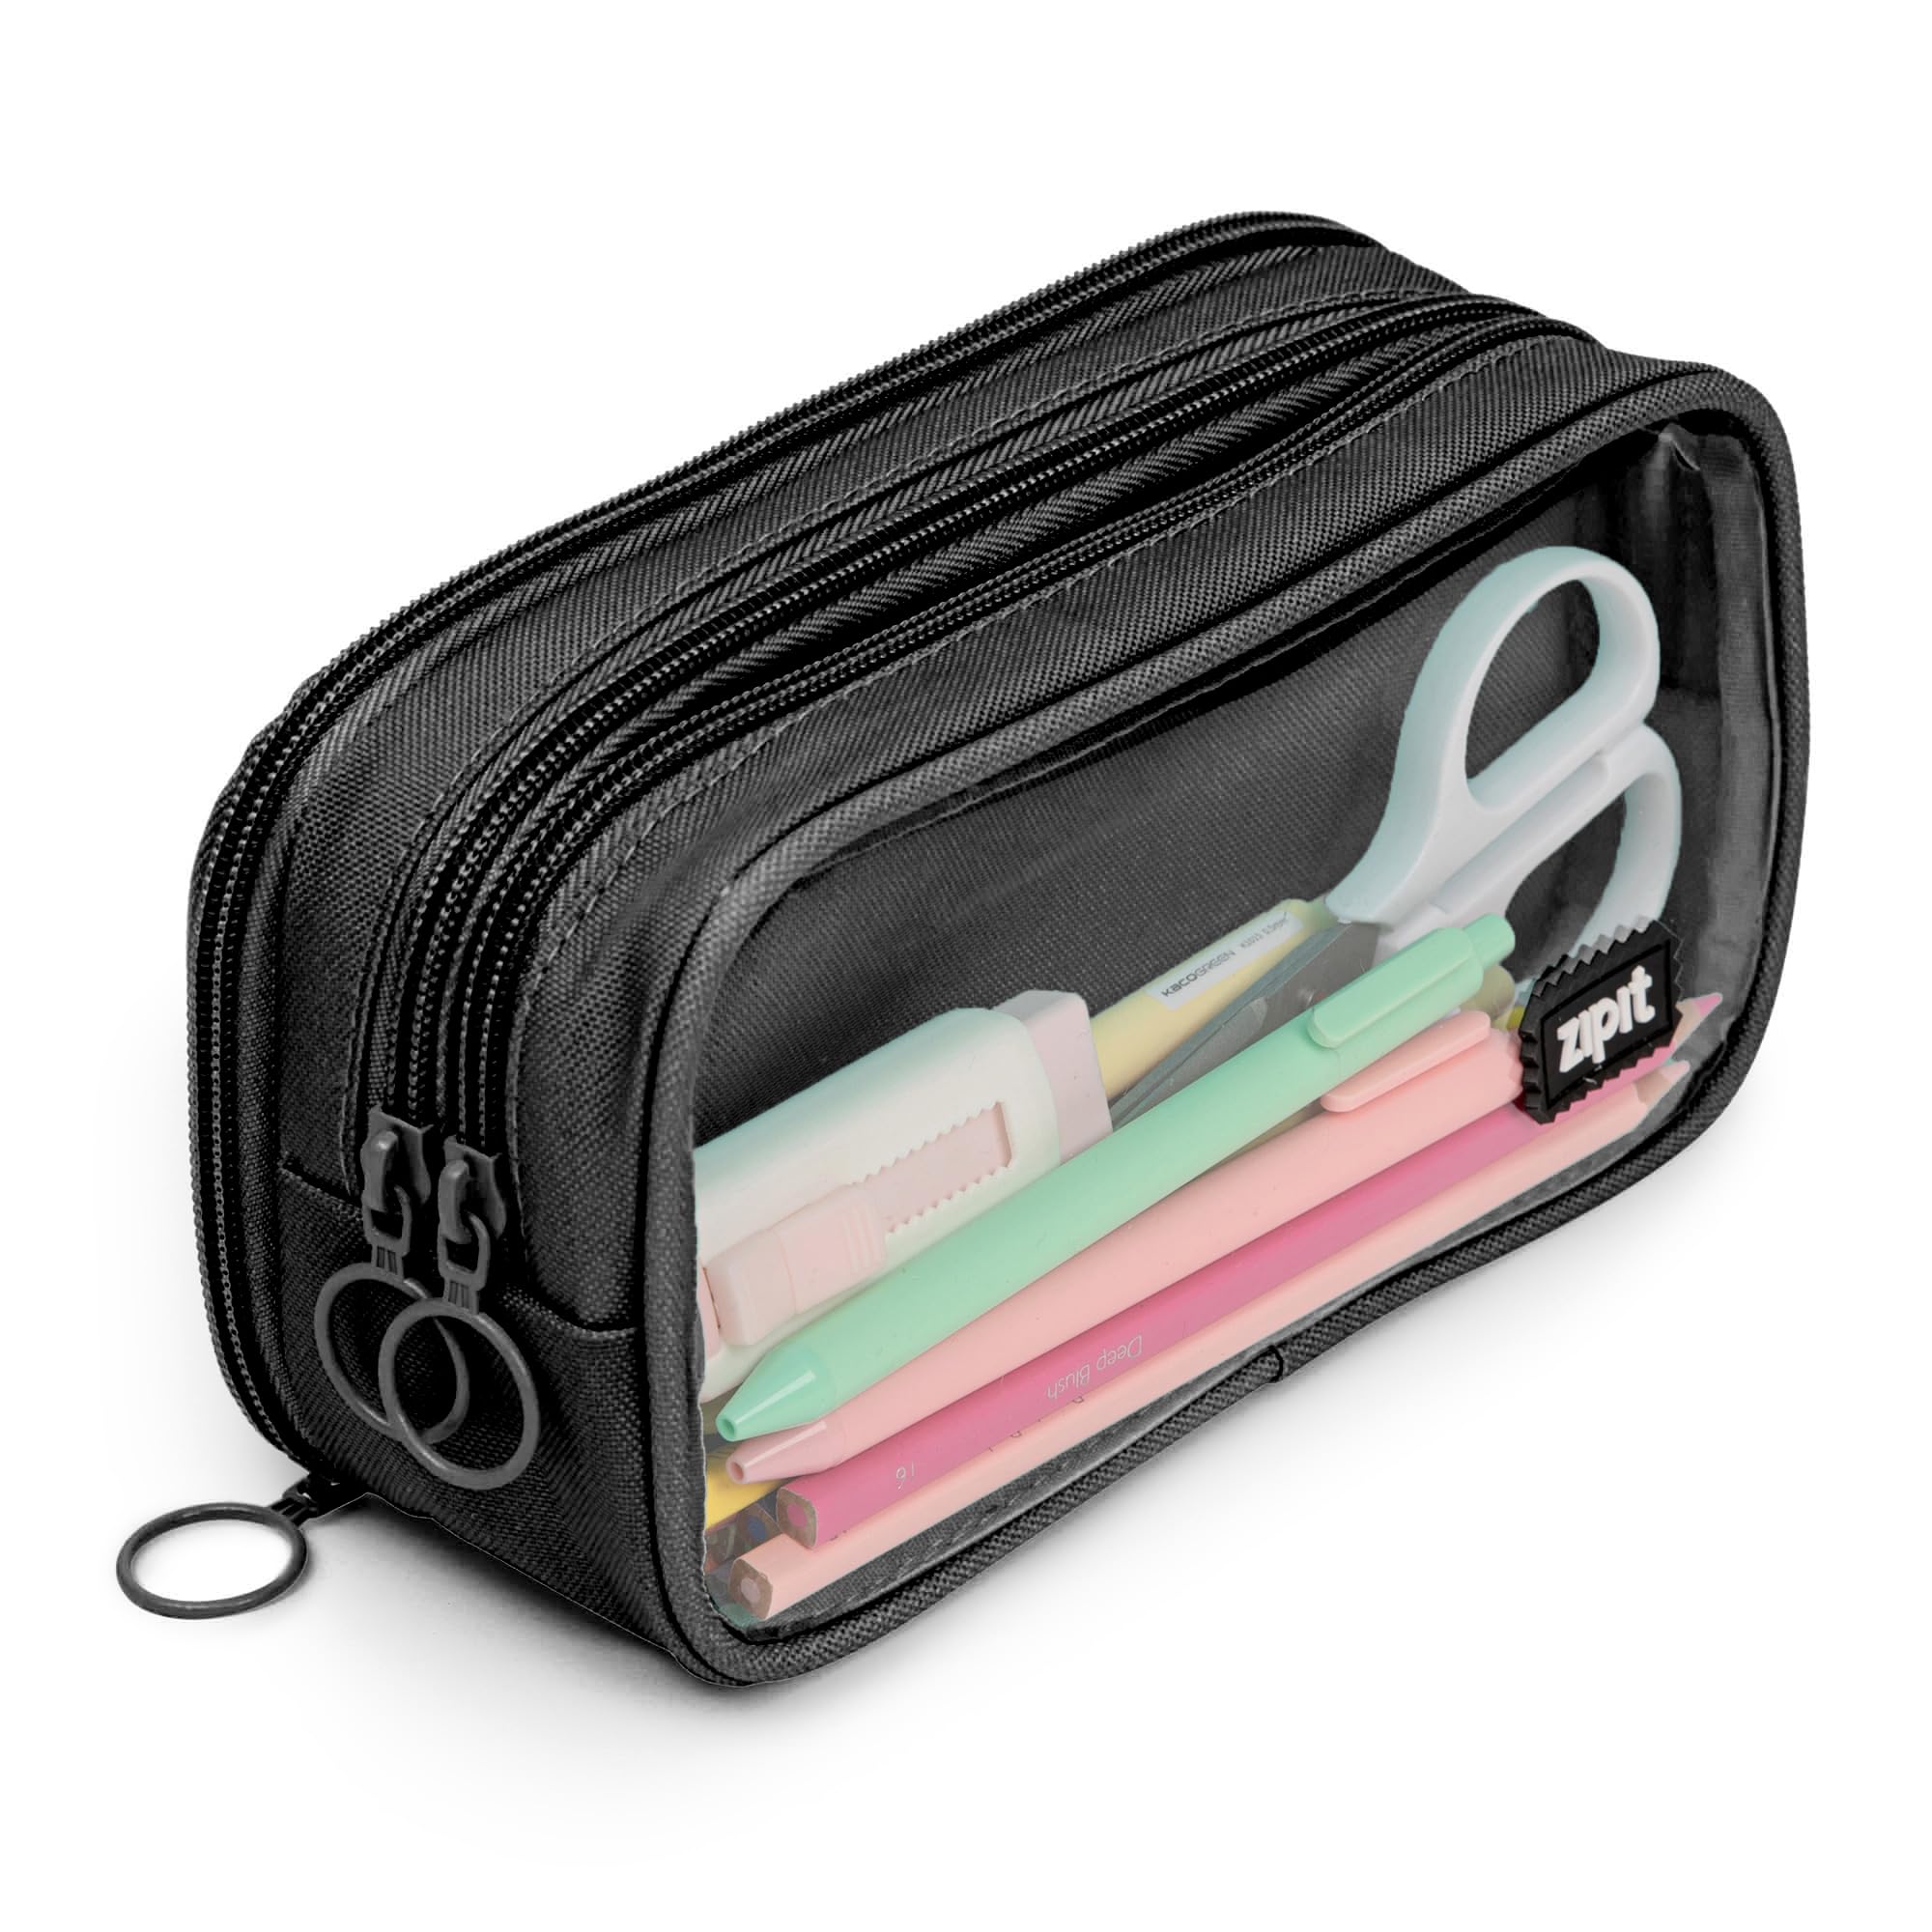 ZIPIT Half & Half Pencil Case | Large Capacity Pencil Pouch | Pencil Bag for School, College and Office (Black)